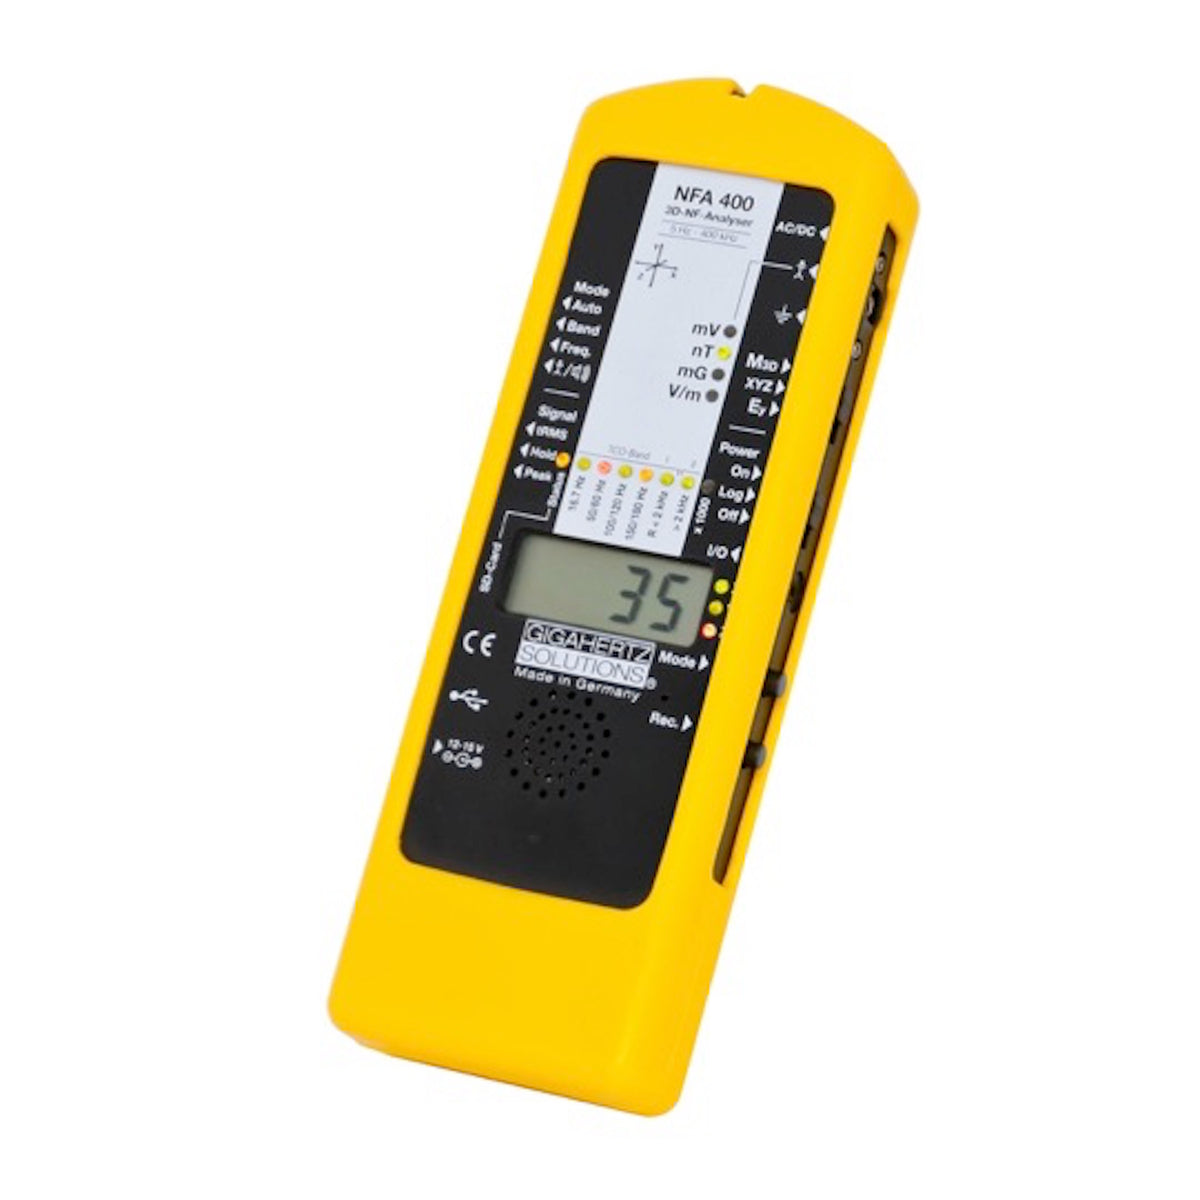 Low Frequency EMF ANALYSER with 3 Dimensional magnetic sensor and data logger: NFA400